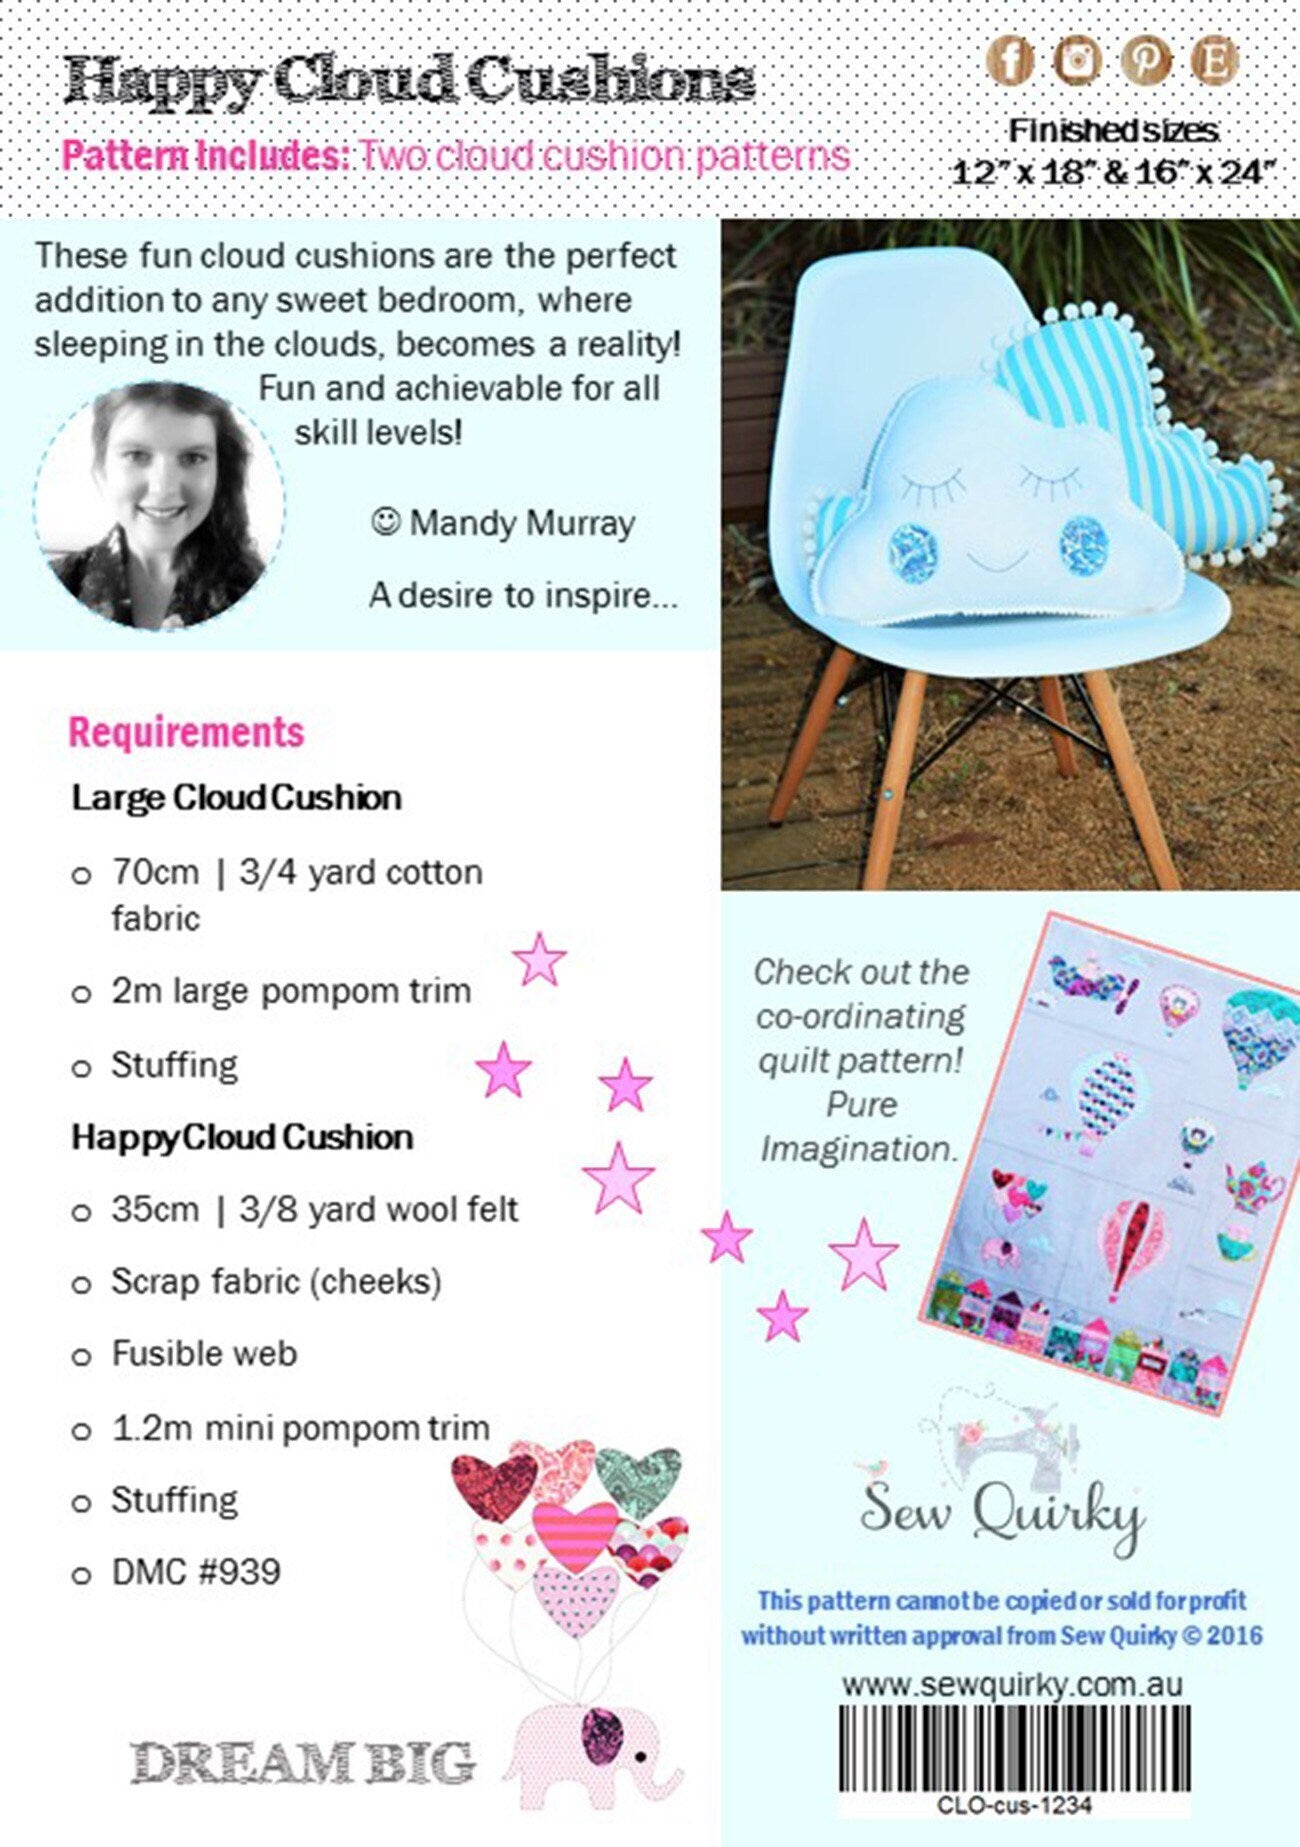 Happy Cloud Cushions - Sew Quirky - Mandy Murray - Pillow Pattern - Stuffie Pattern